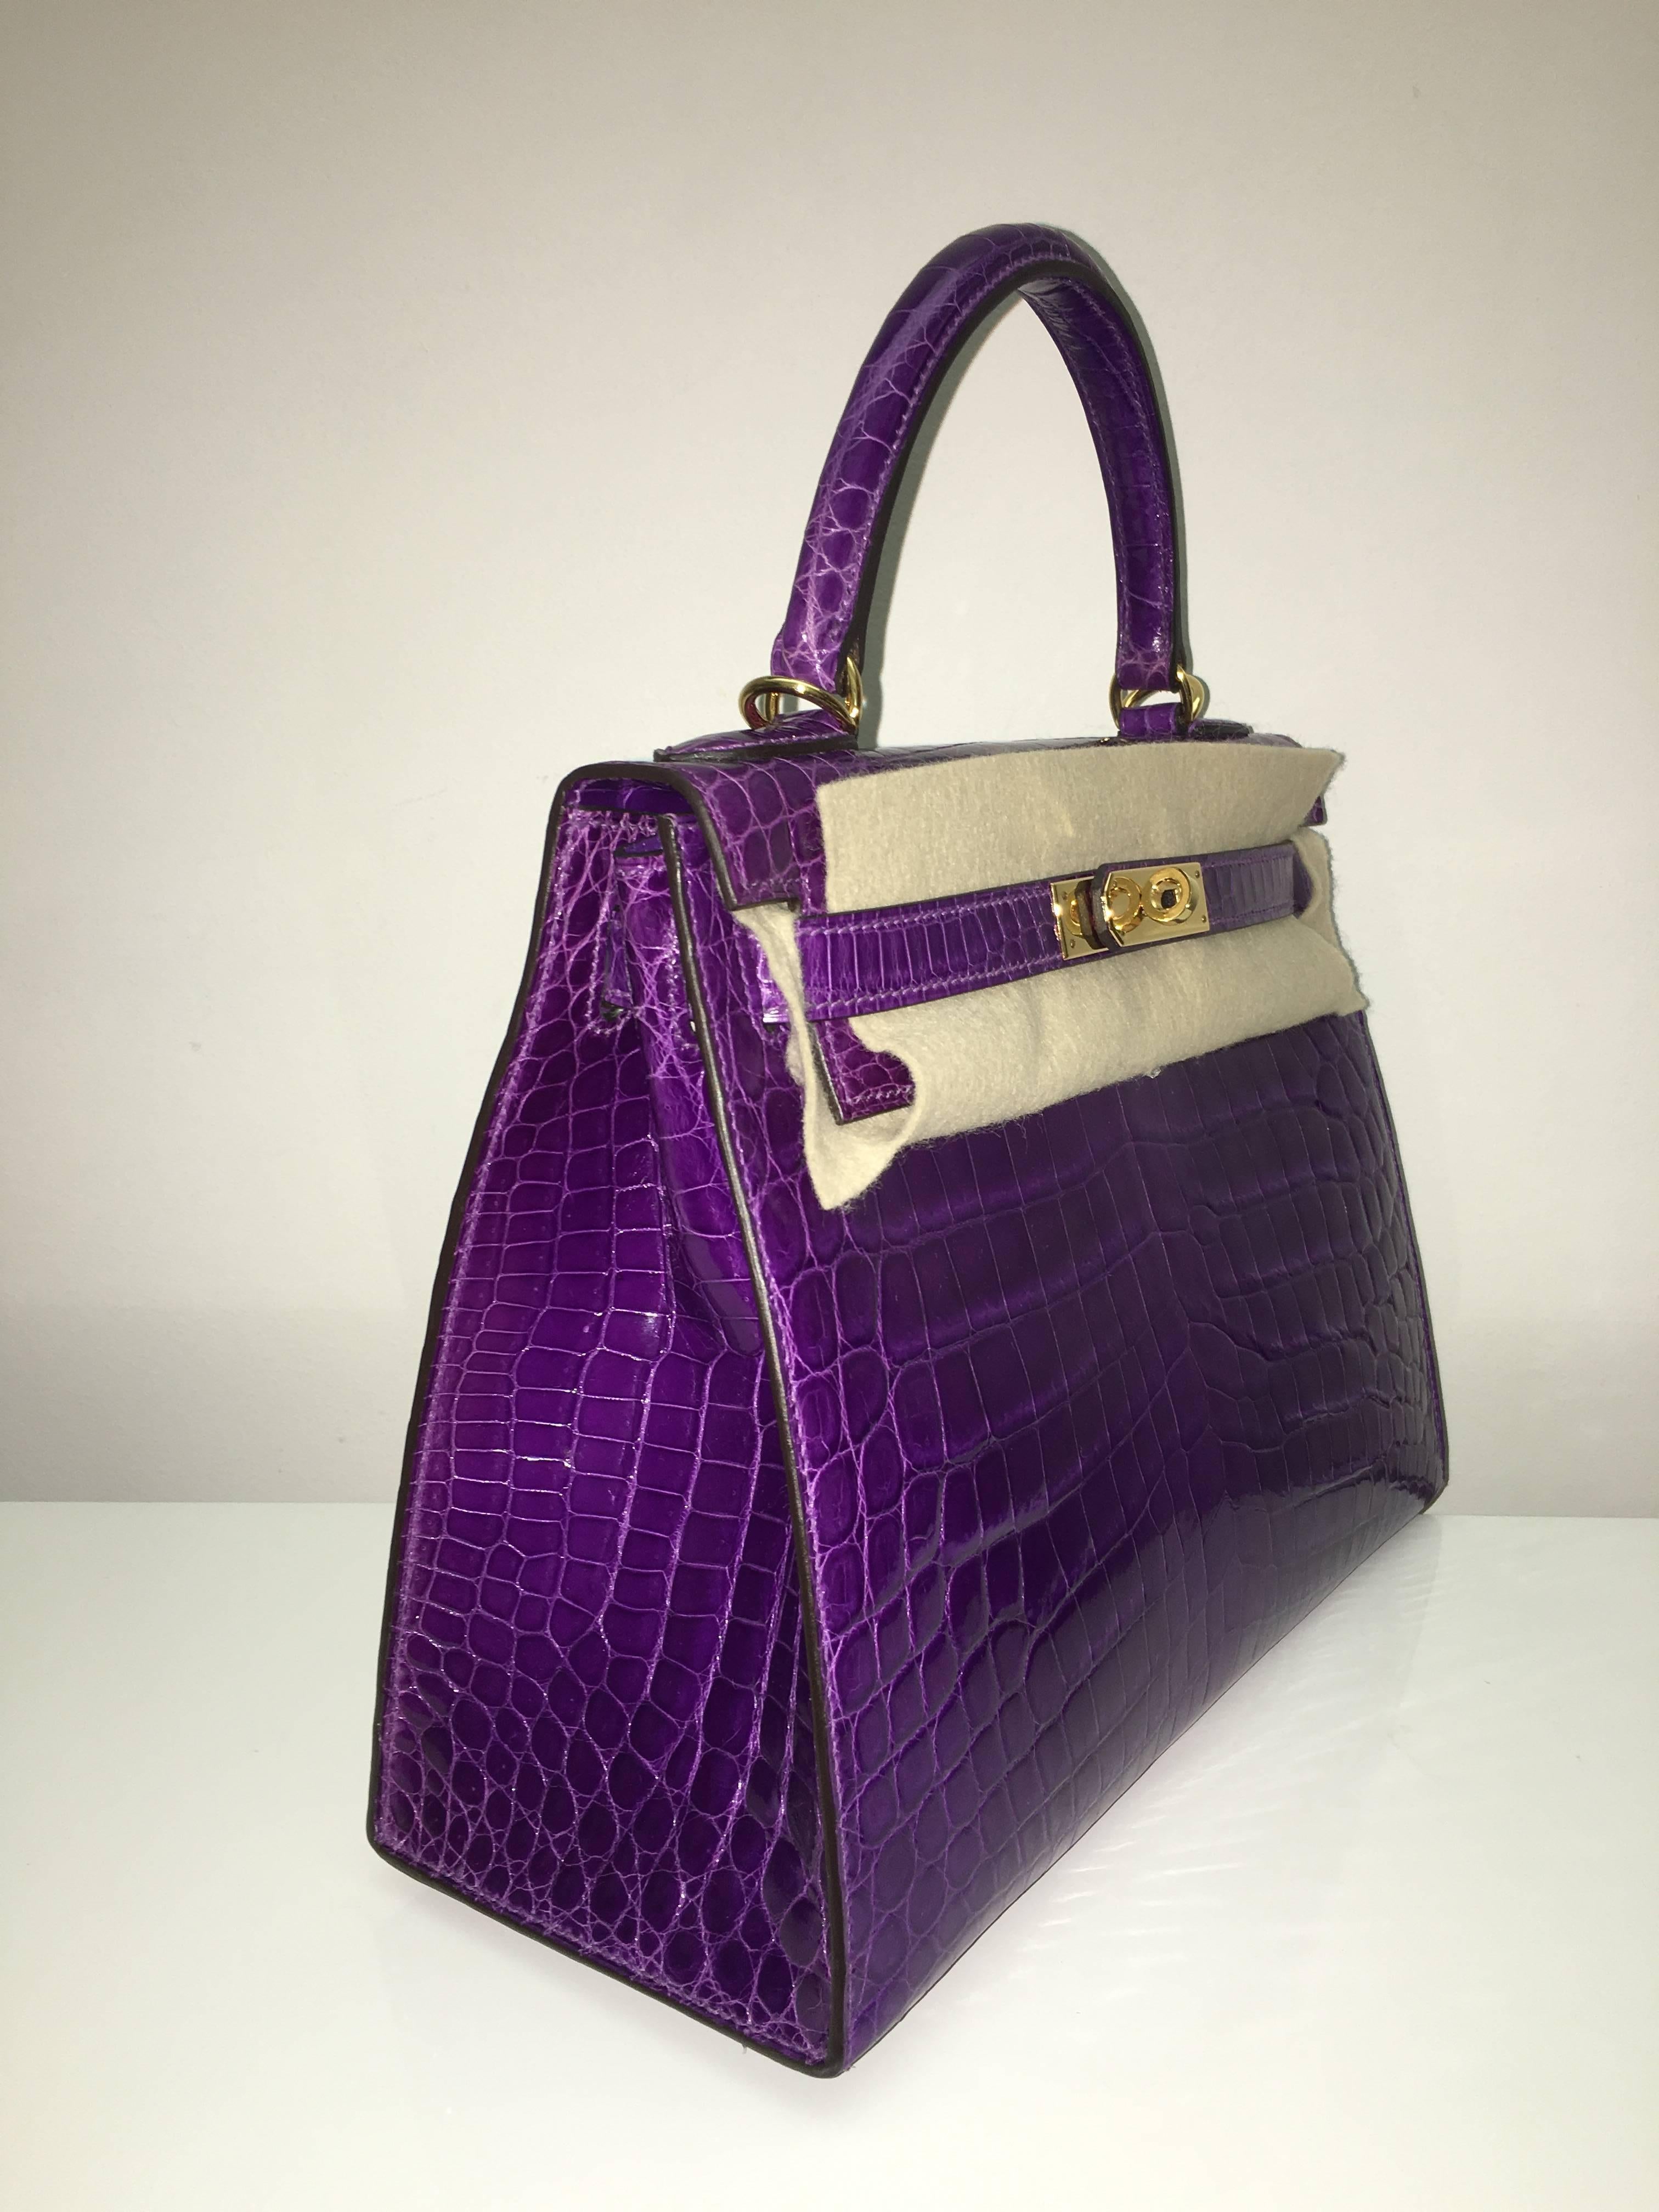 Hermes 
Kelly Size 28
Shiny Crocodile Skin (Leather) 
Colour Ultra-Violet
Gold Hardware 
store fresh, comes with receipt and full set (dust bag, box...) 
Hydeparkfashion specializes in sourcing and delivering authentic luxury handbags, mainly